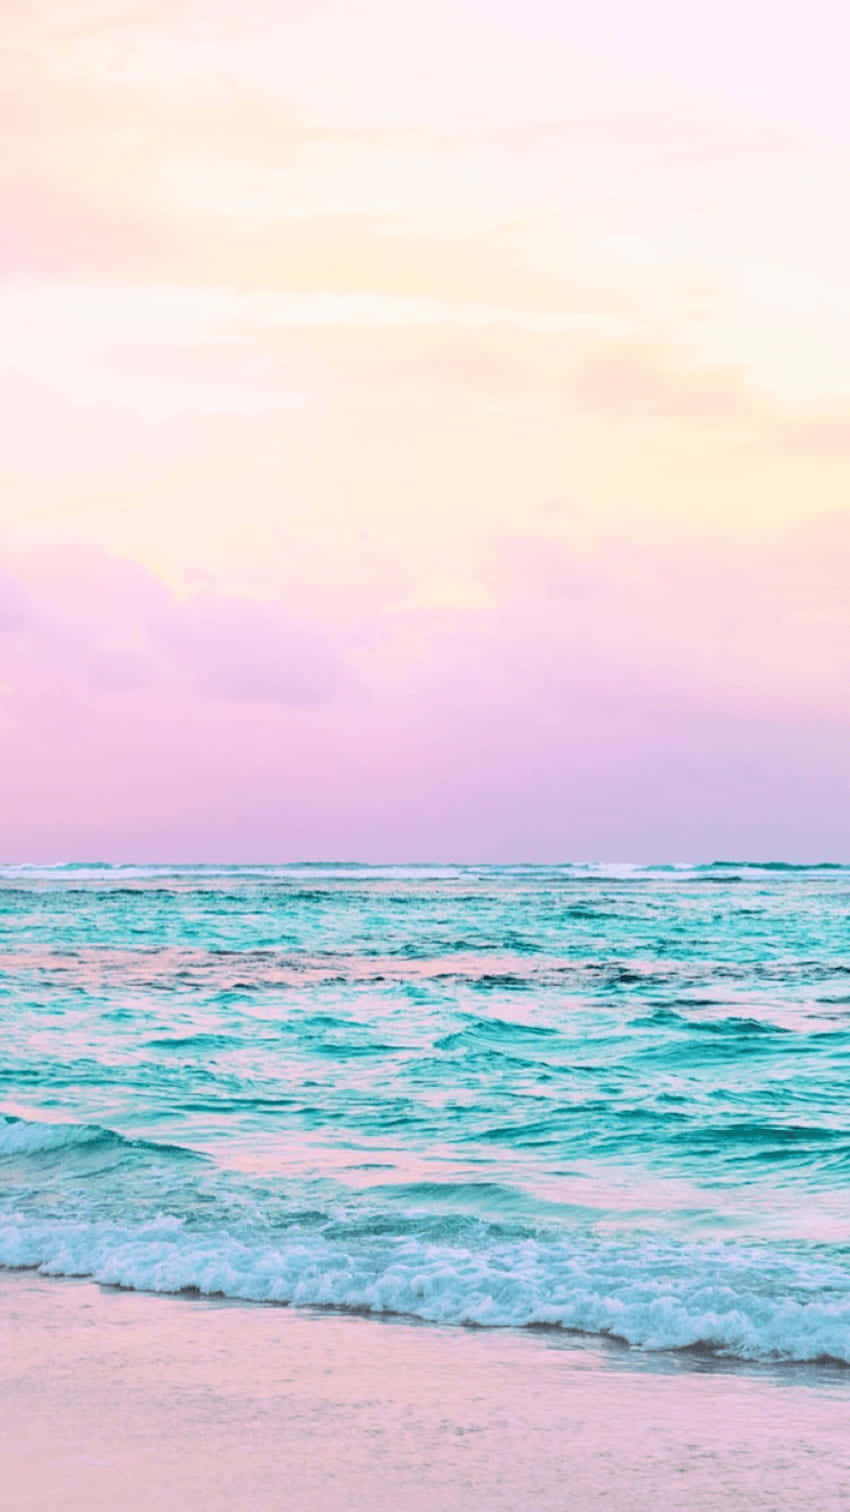 Here's a glimpse of natural beauty with a view of a pretty ocean. Wallpaper